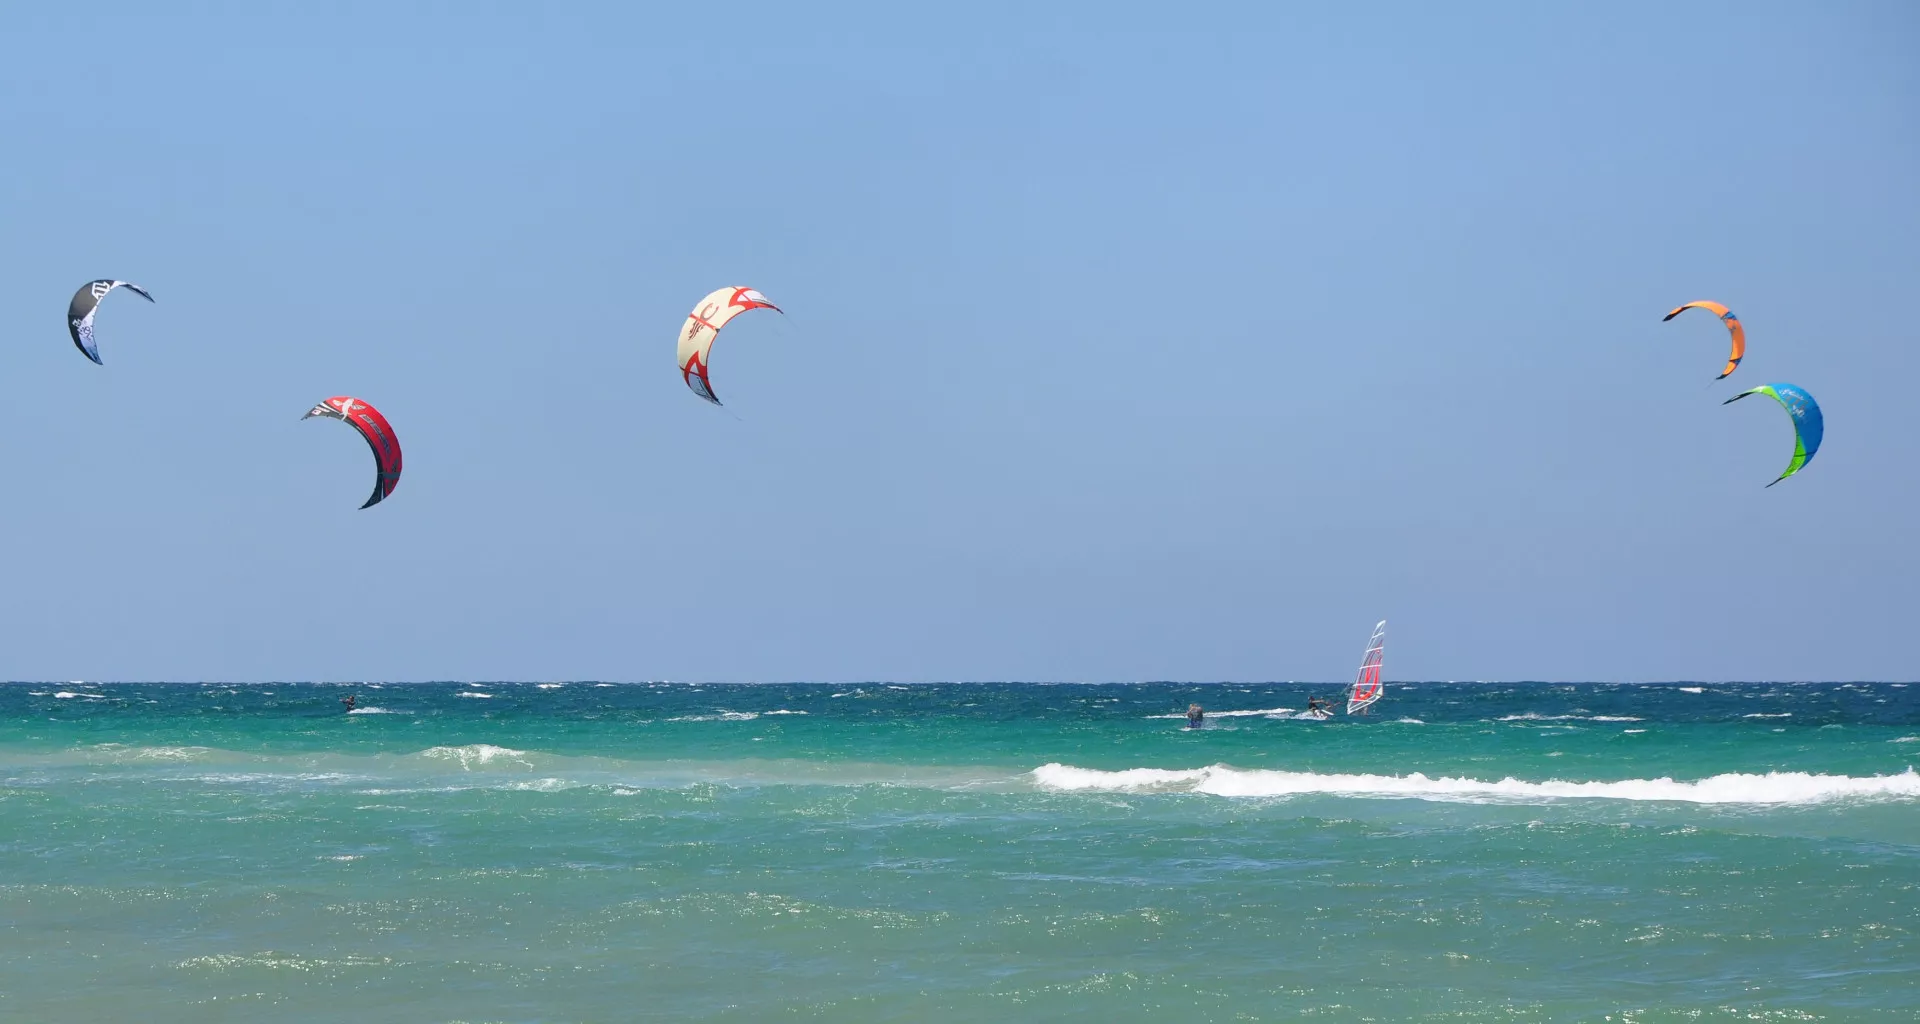 Wind Riders in Italy, Europe | Kitesurfing - Rated 10